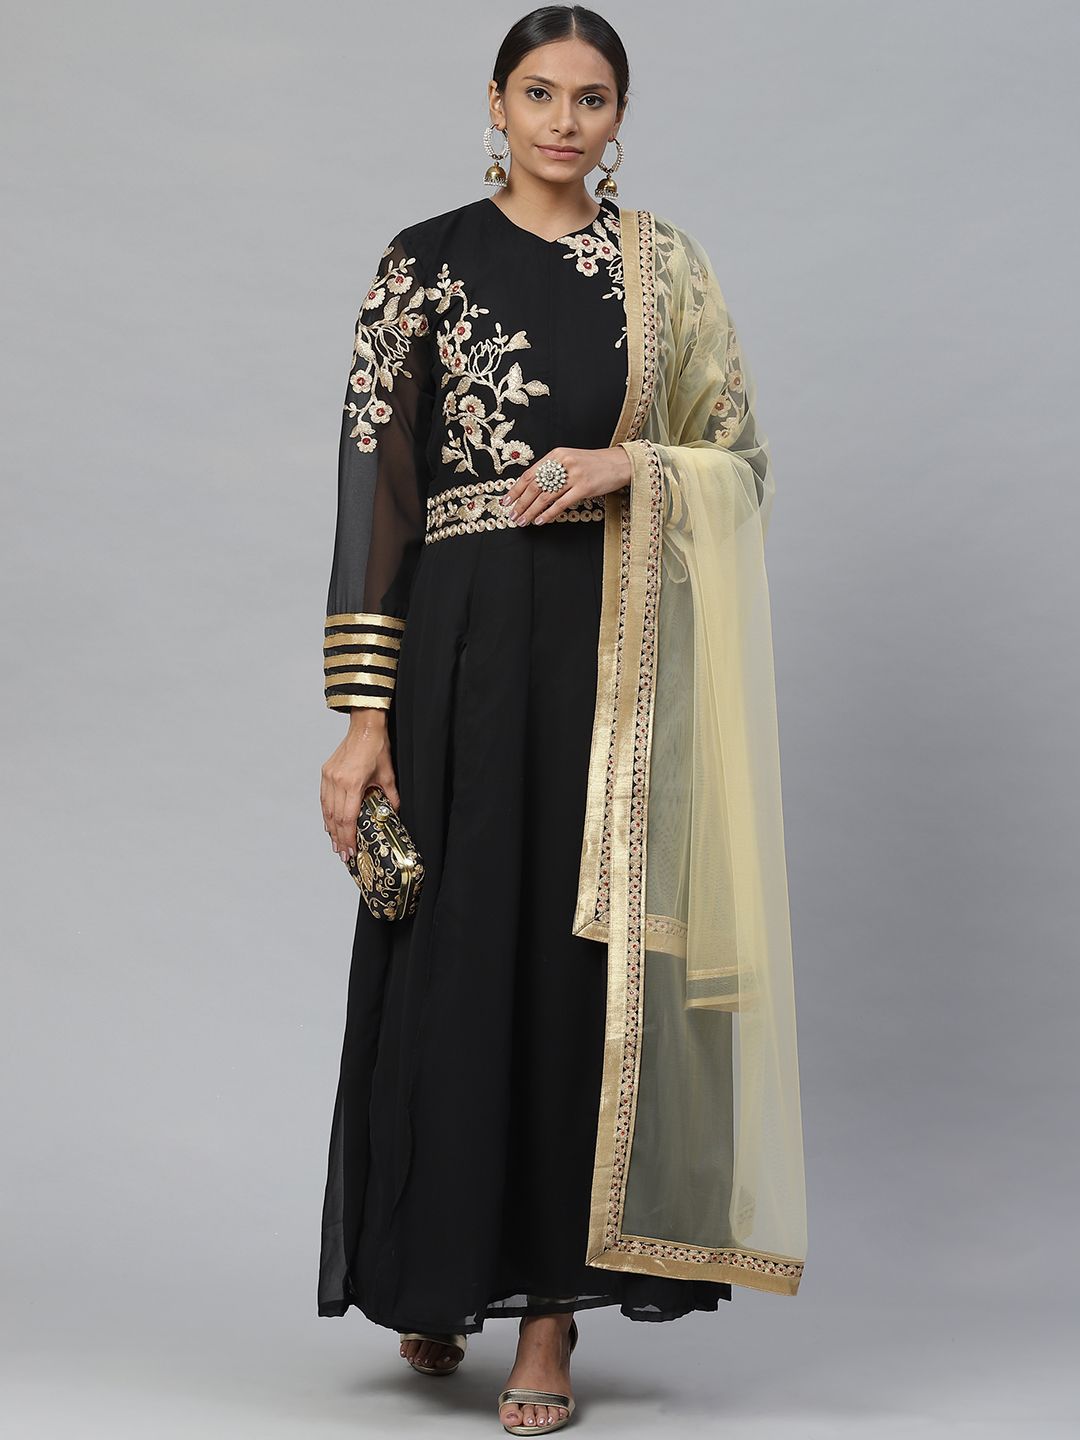 Readiprint Fashions Black Embroidered Semi-Stitched Dress Material Price in India